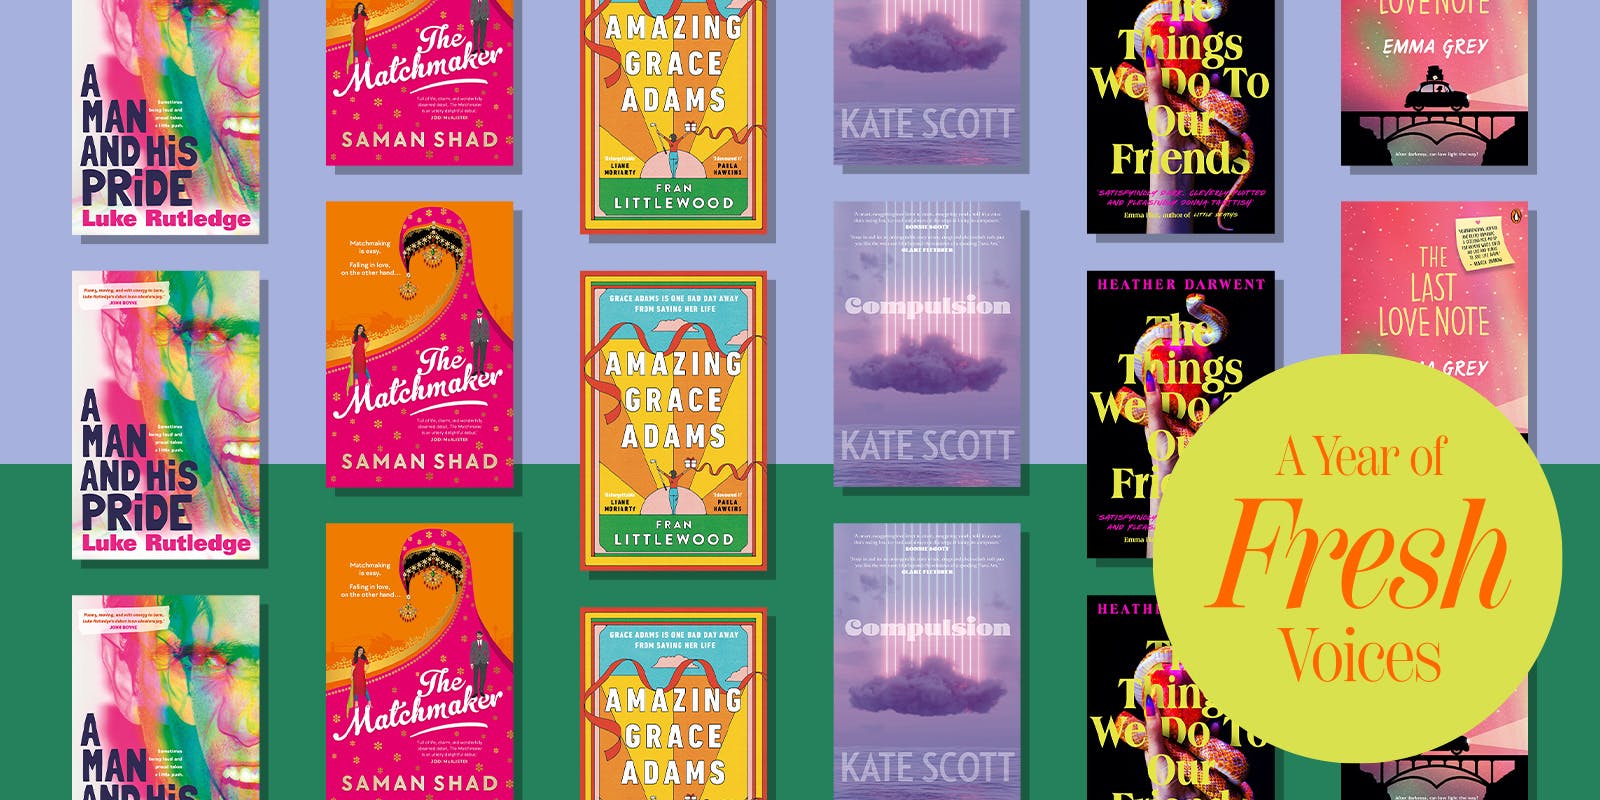 Get ready, these 6 amazing debut novels come out in January 2023